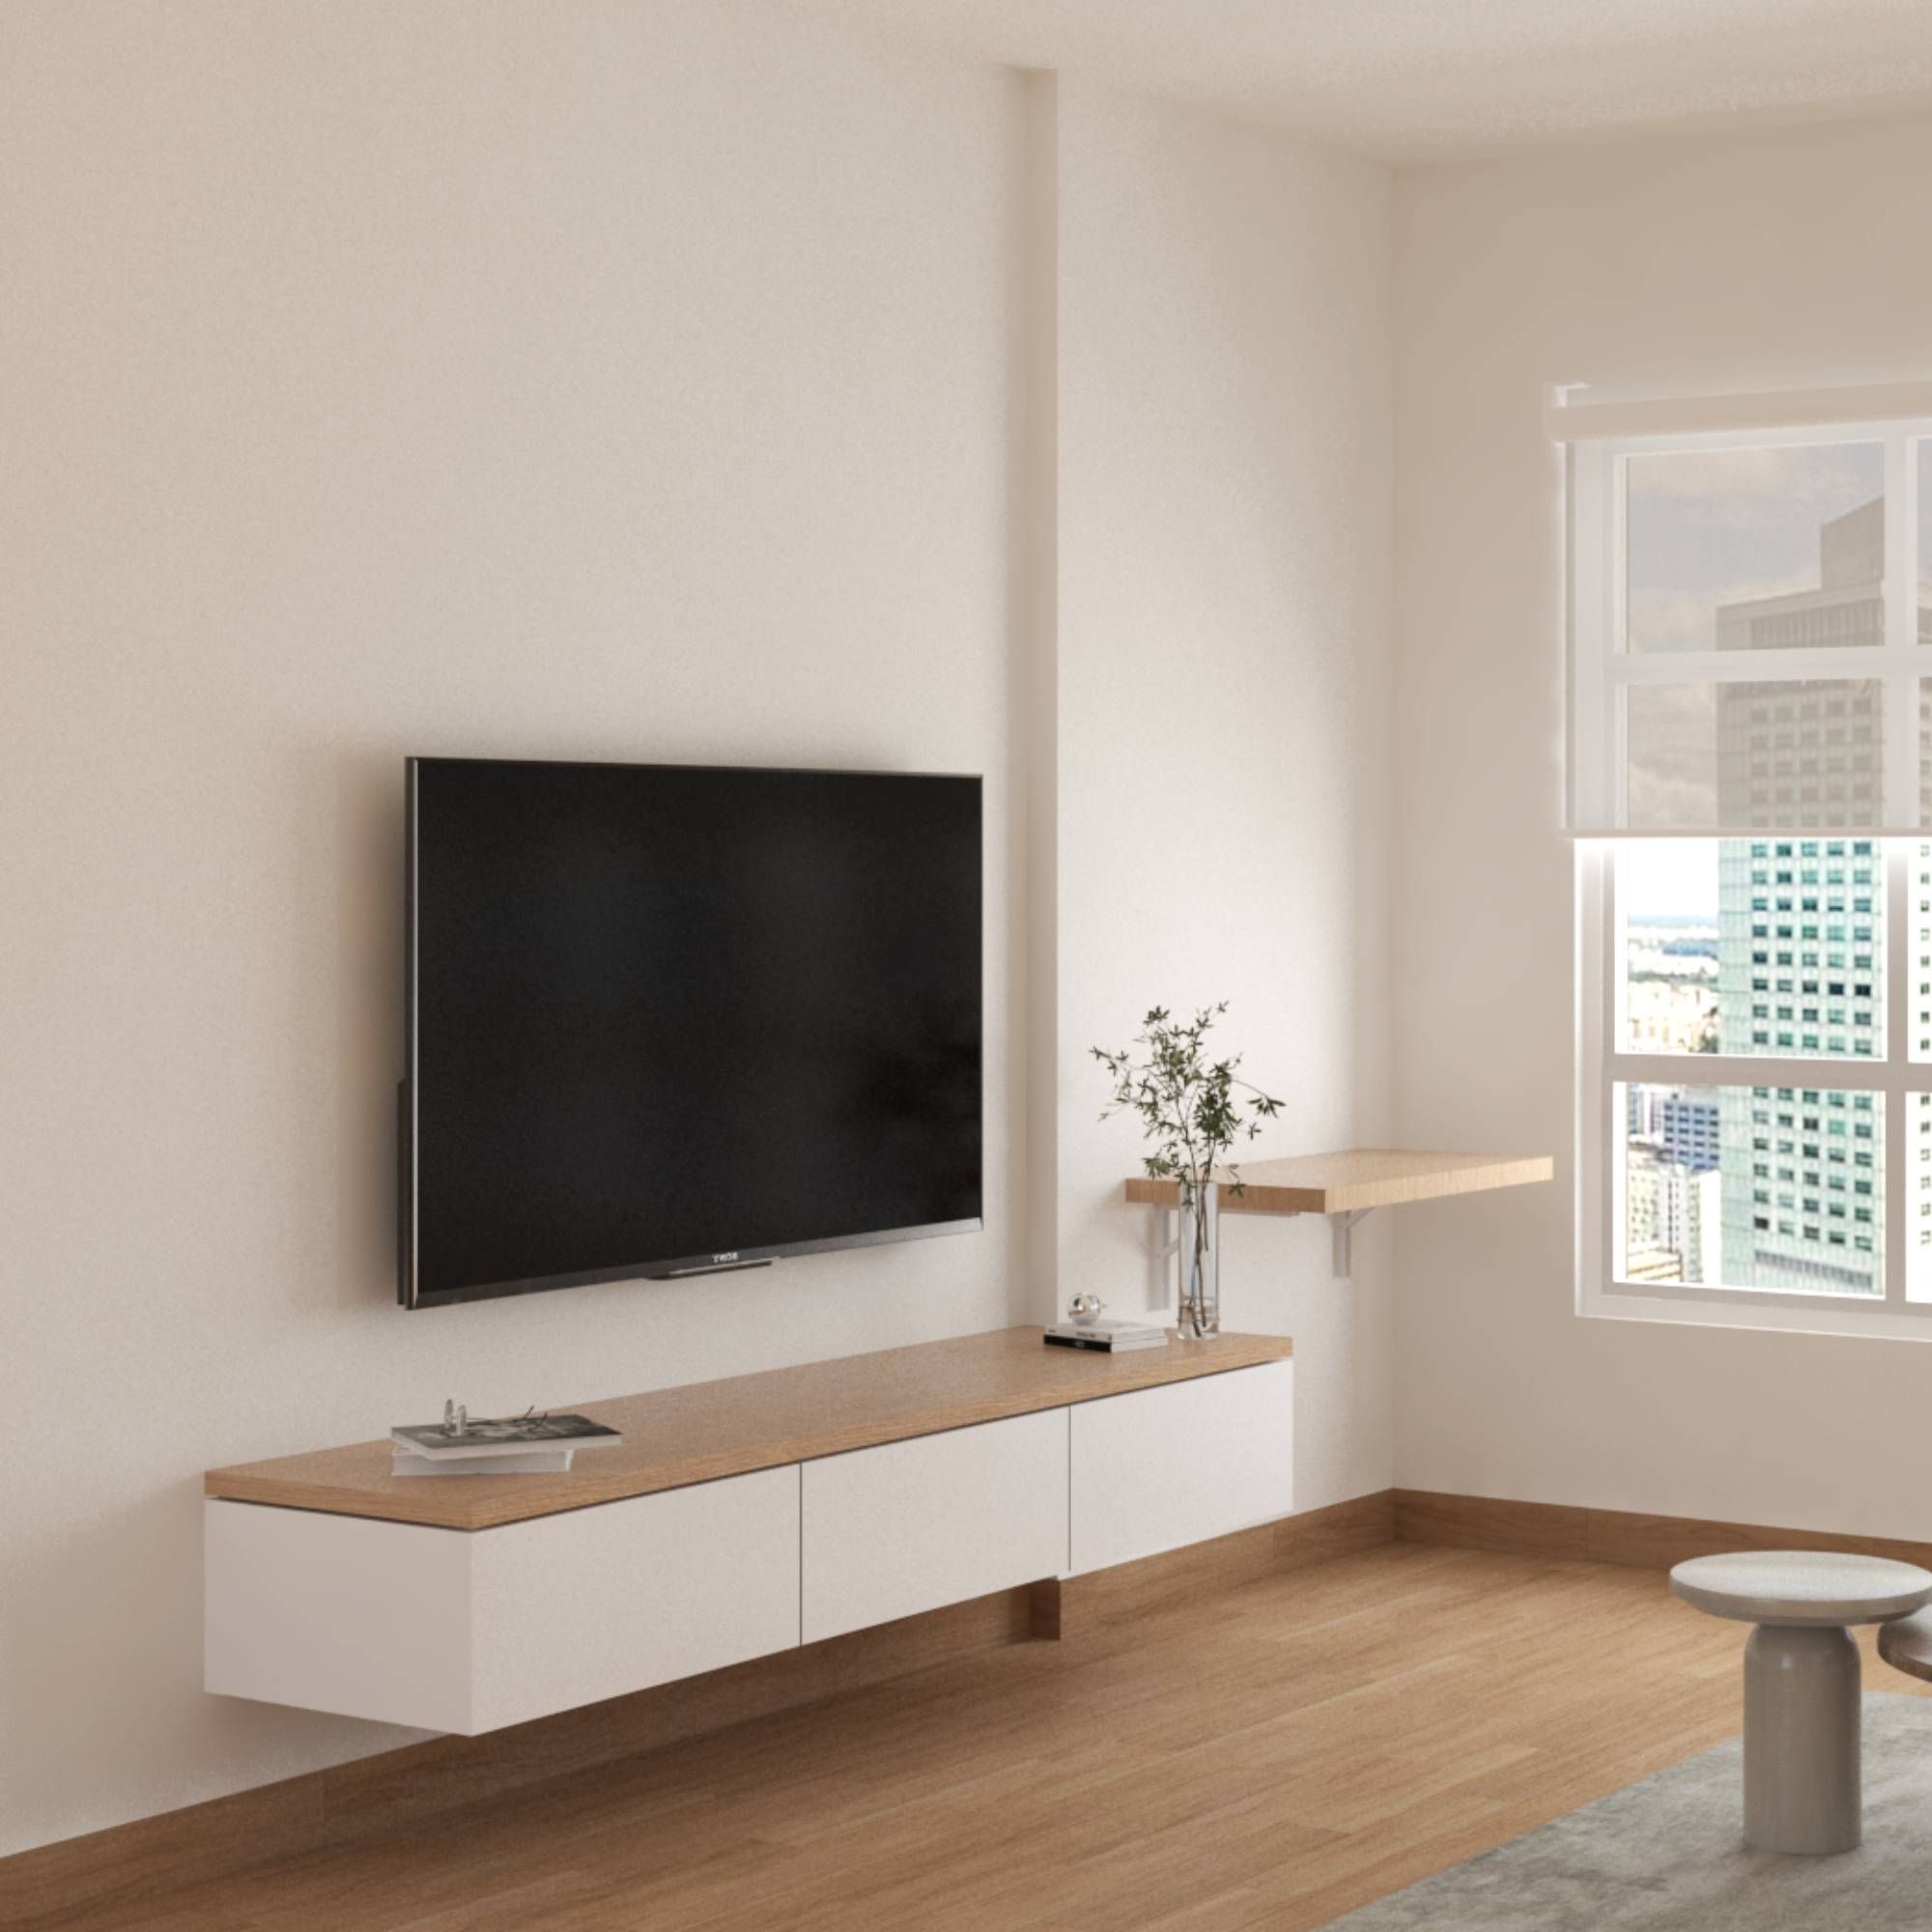 Scandinavian White And Wood TV Unit Design With Convertible Study Table